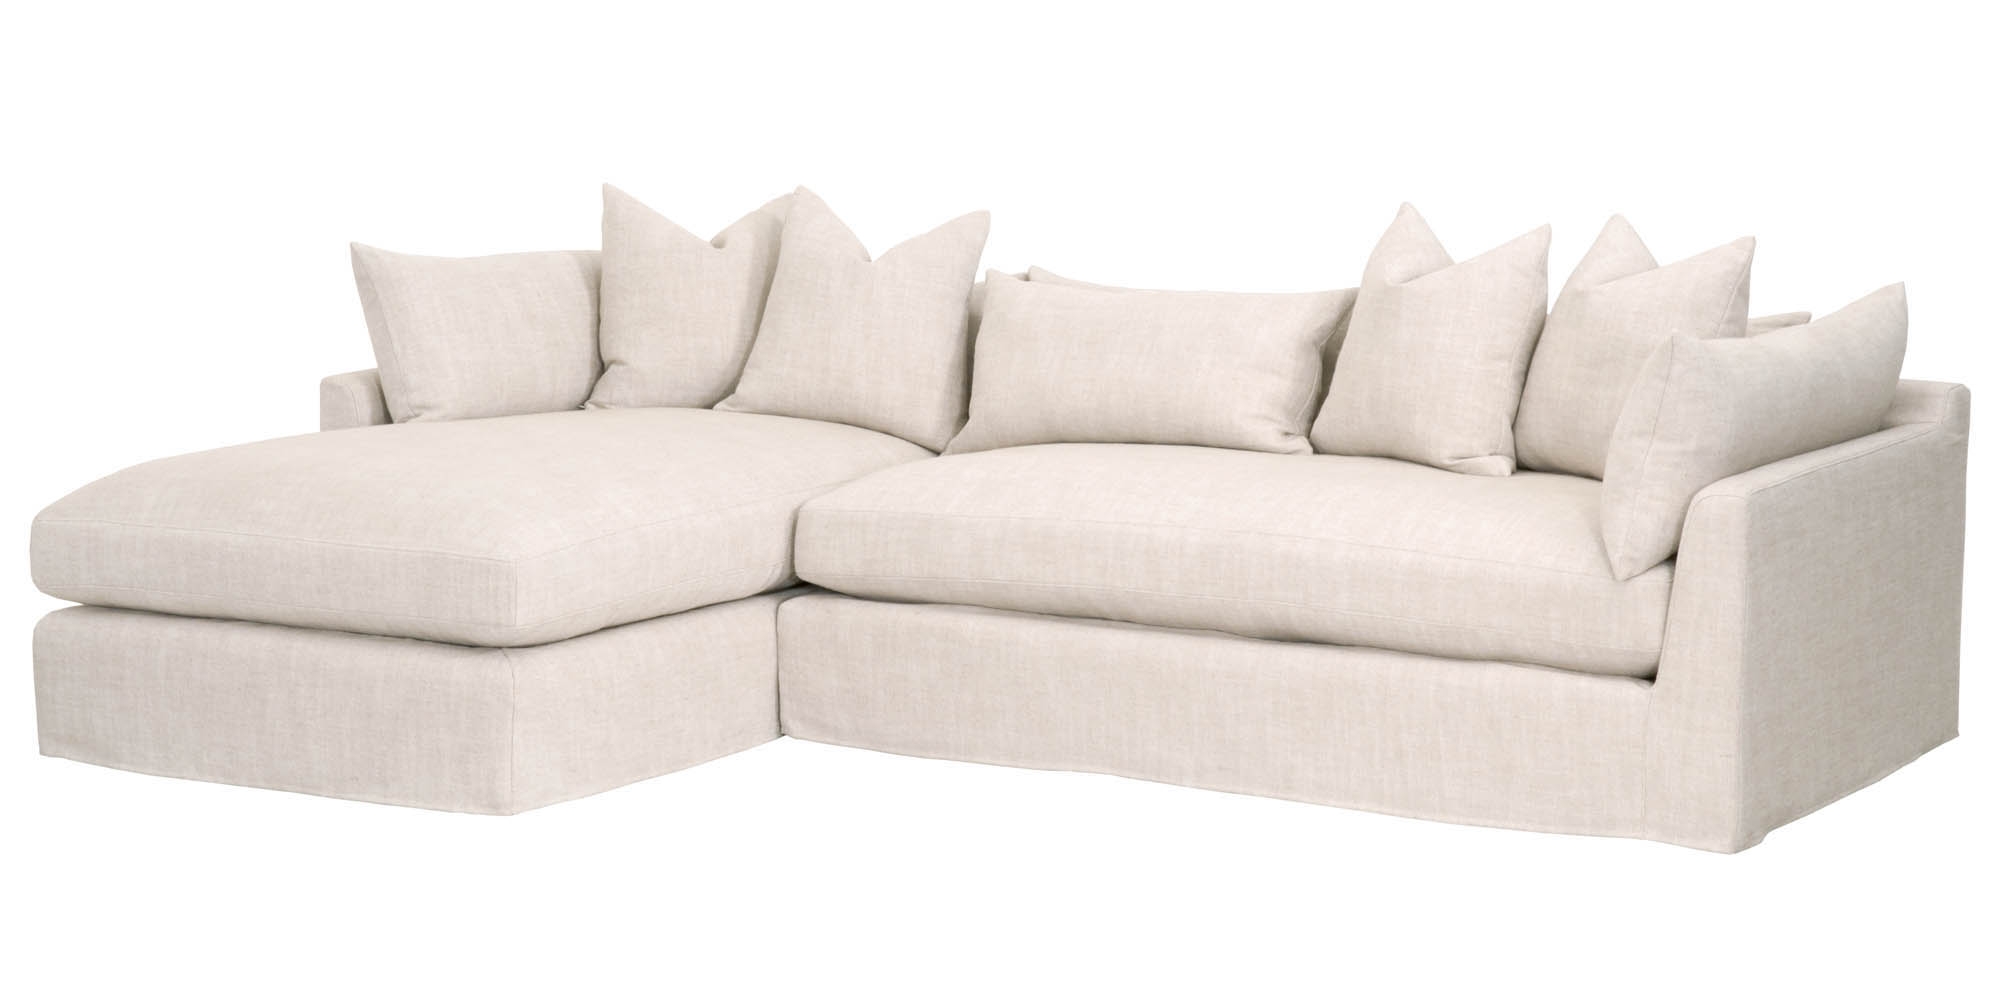 Parque Slipcover Sectional Sofa - Image 3